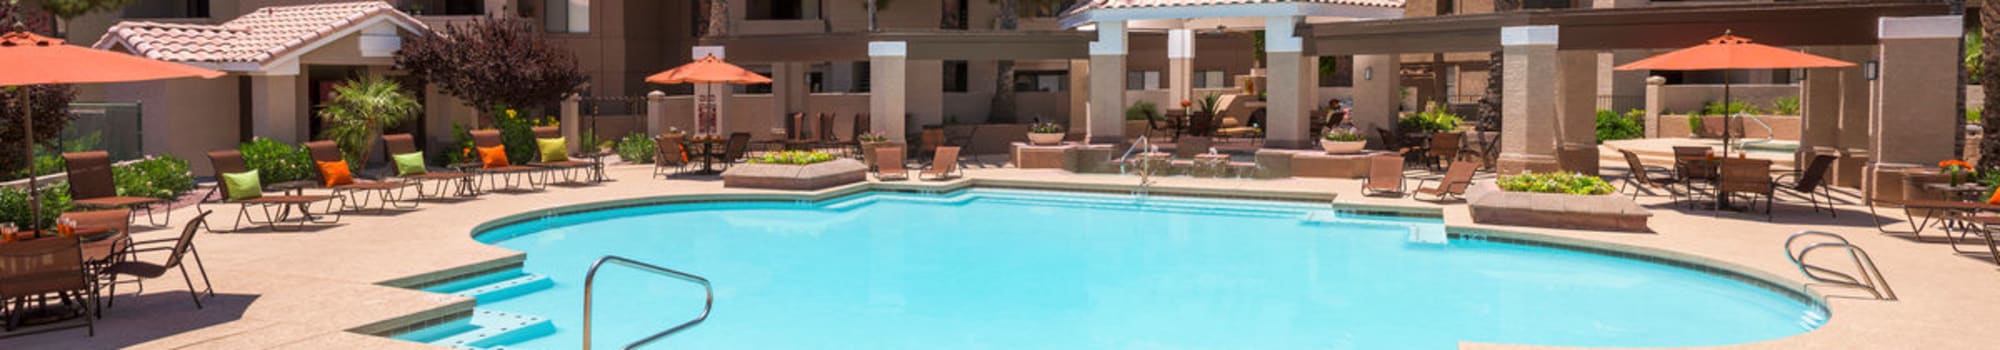 Pet friendly at The Palisades in Paradise Valley in Phoenix, Arizona